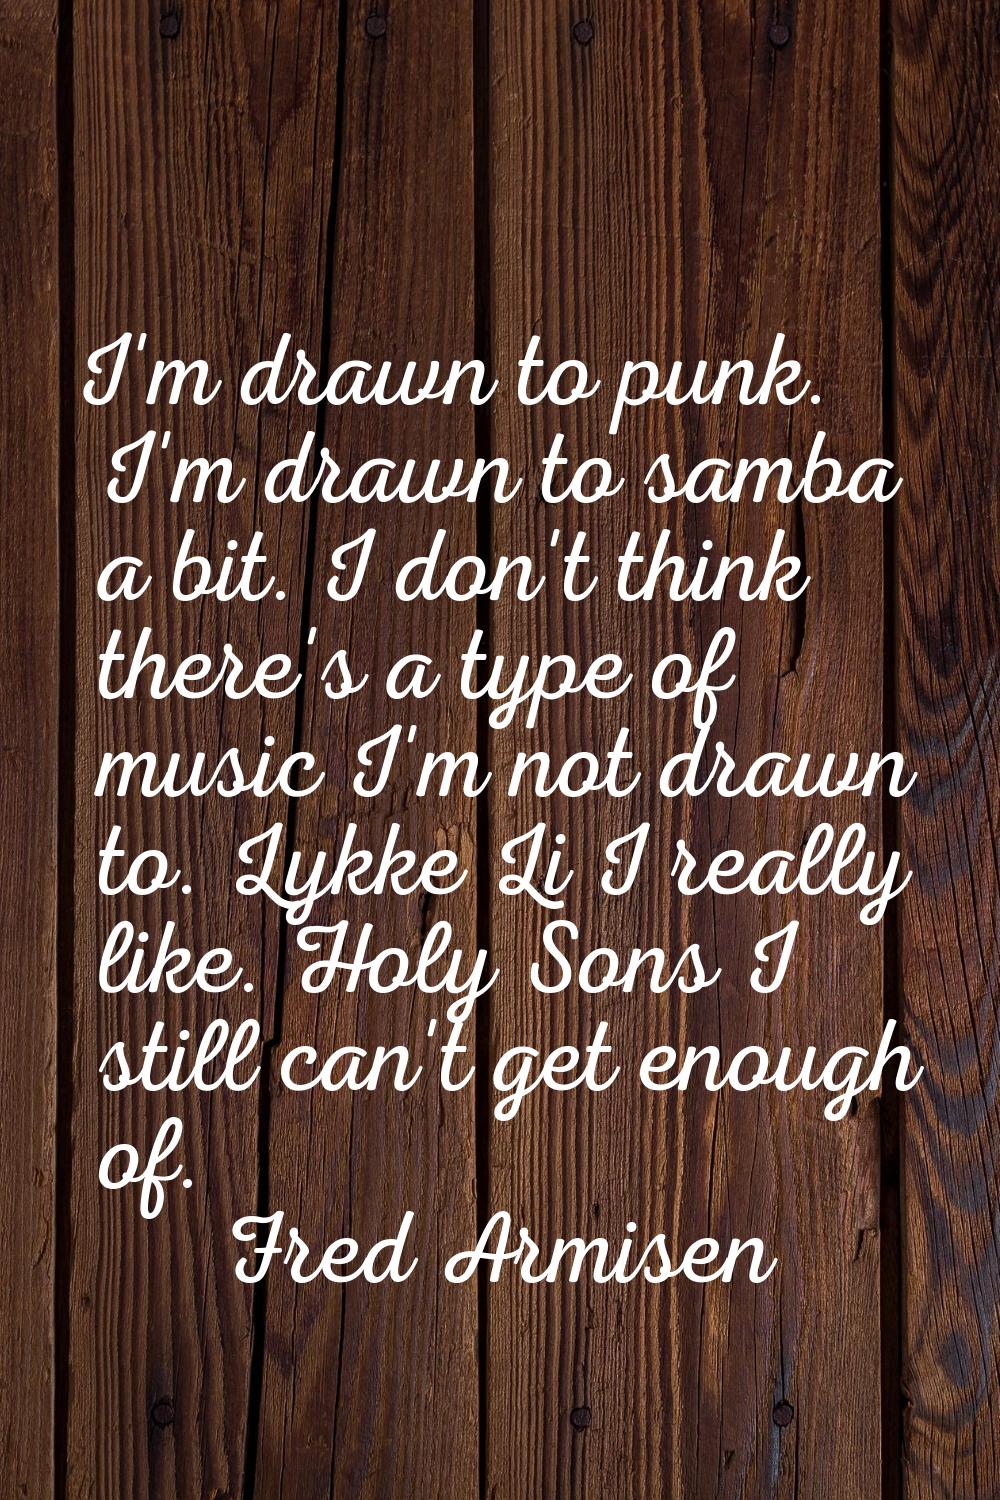 I'm drawn to punk. I'm drawn to samba a bit. I don't think there's a type of music I'm not drawn to